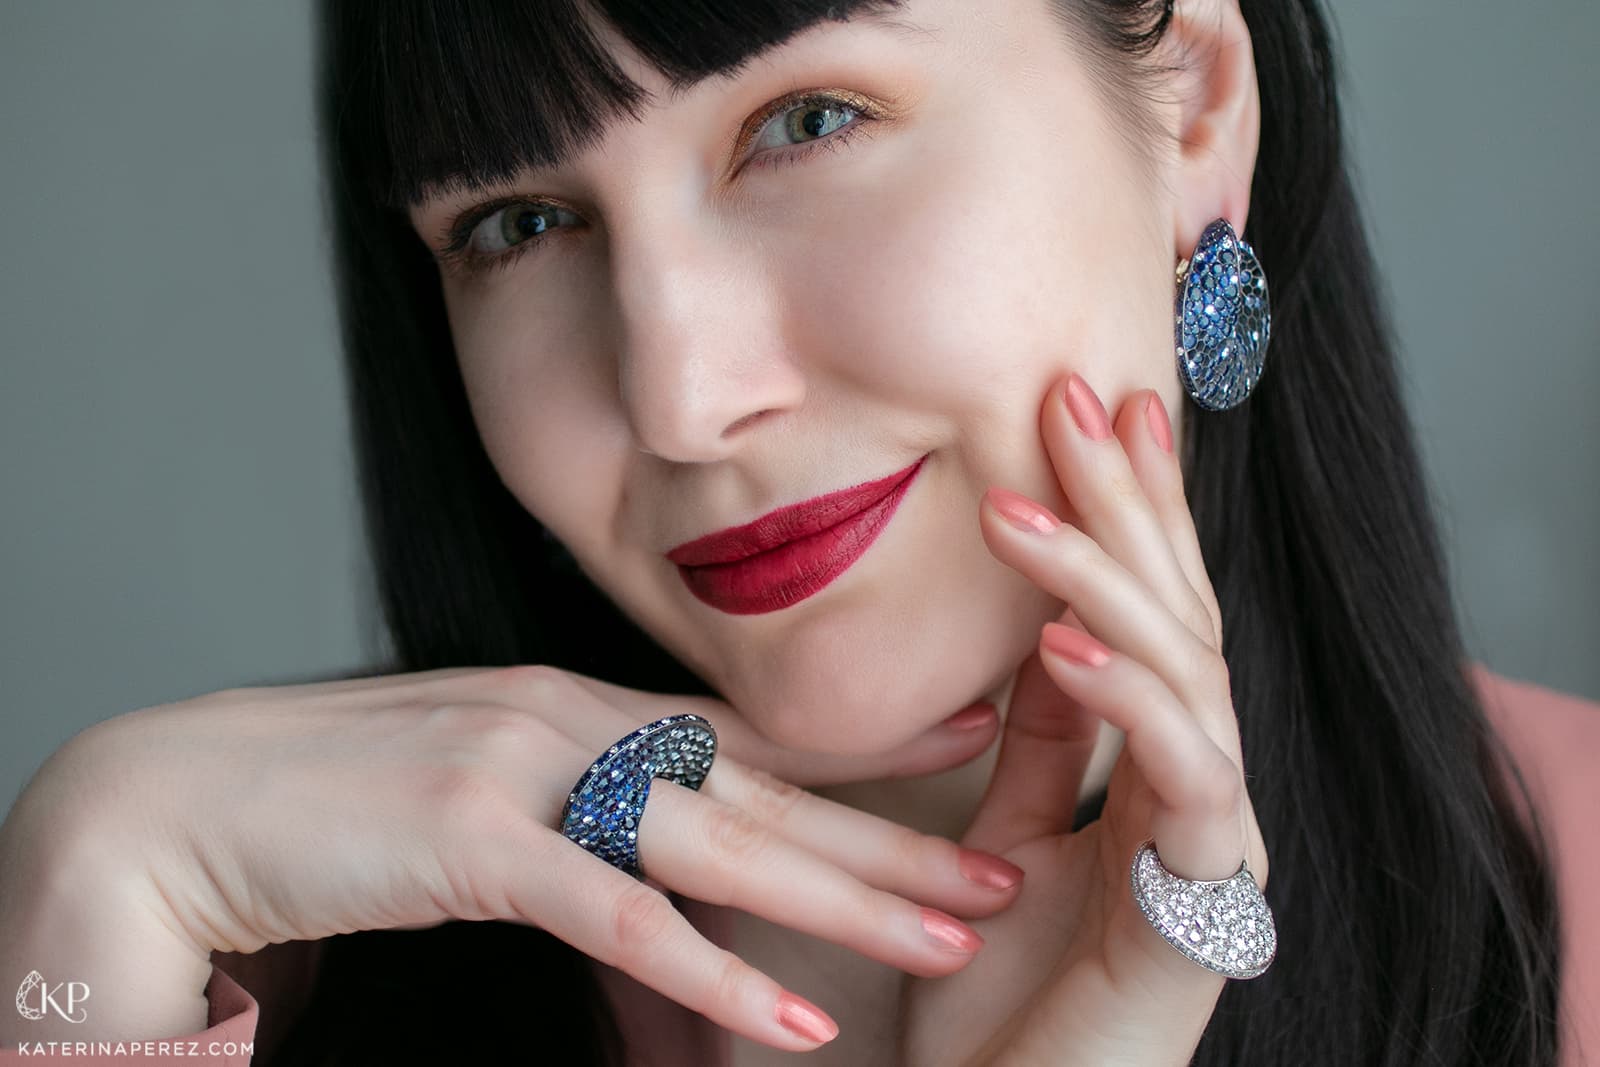 Katerina Perez wears a selection of jewels by Maison Alix Dumas, including the ‘Eternity Night’ ring with 12.62 carats of natural sapphires from Sri Lanka and diamonds (left), a colourless diamond ring, and a pair of ‘Eternity Night’ earrings, also with diamonds and sapphires